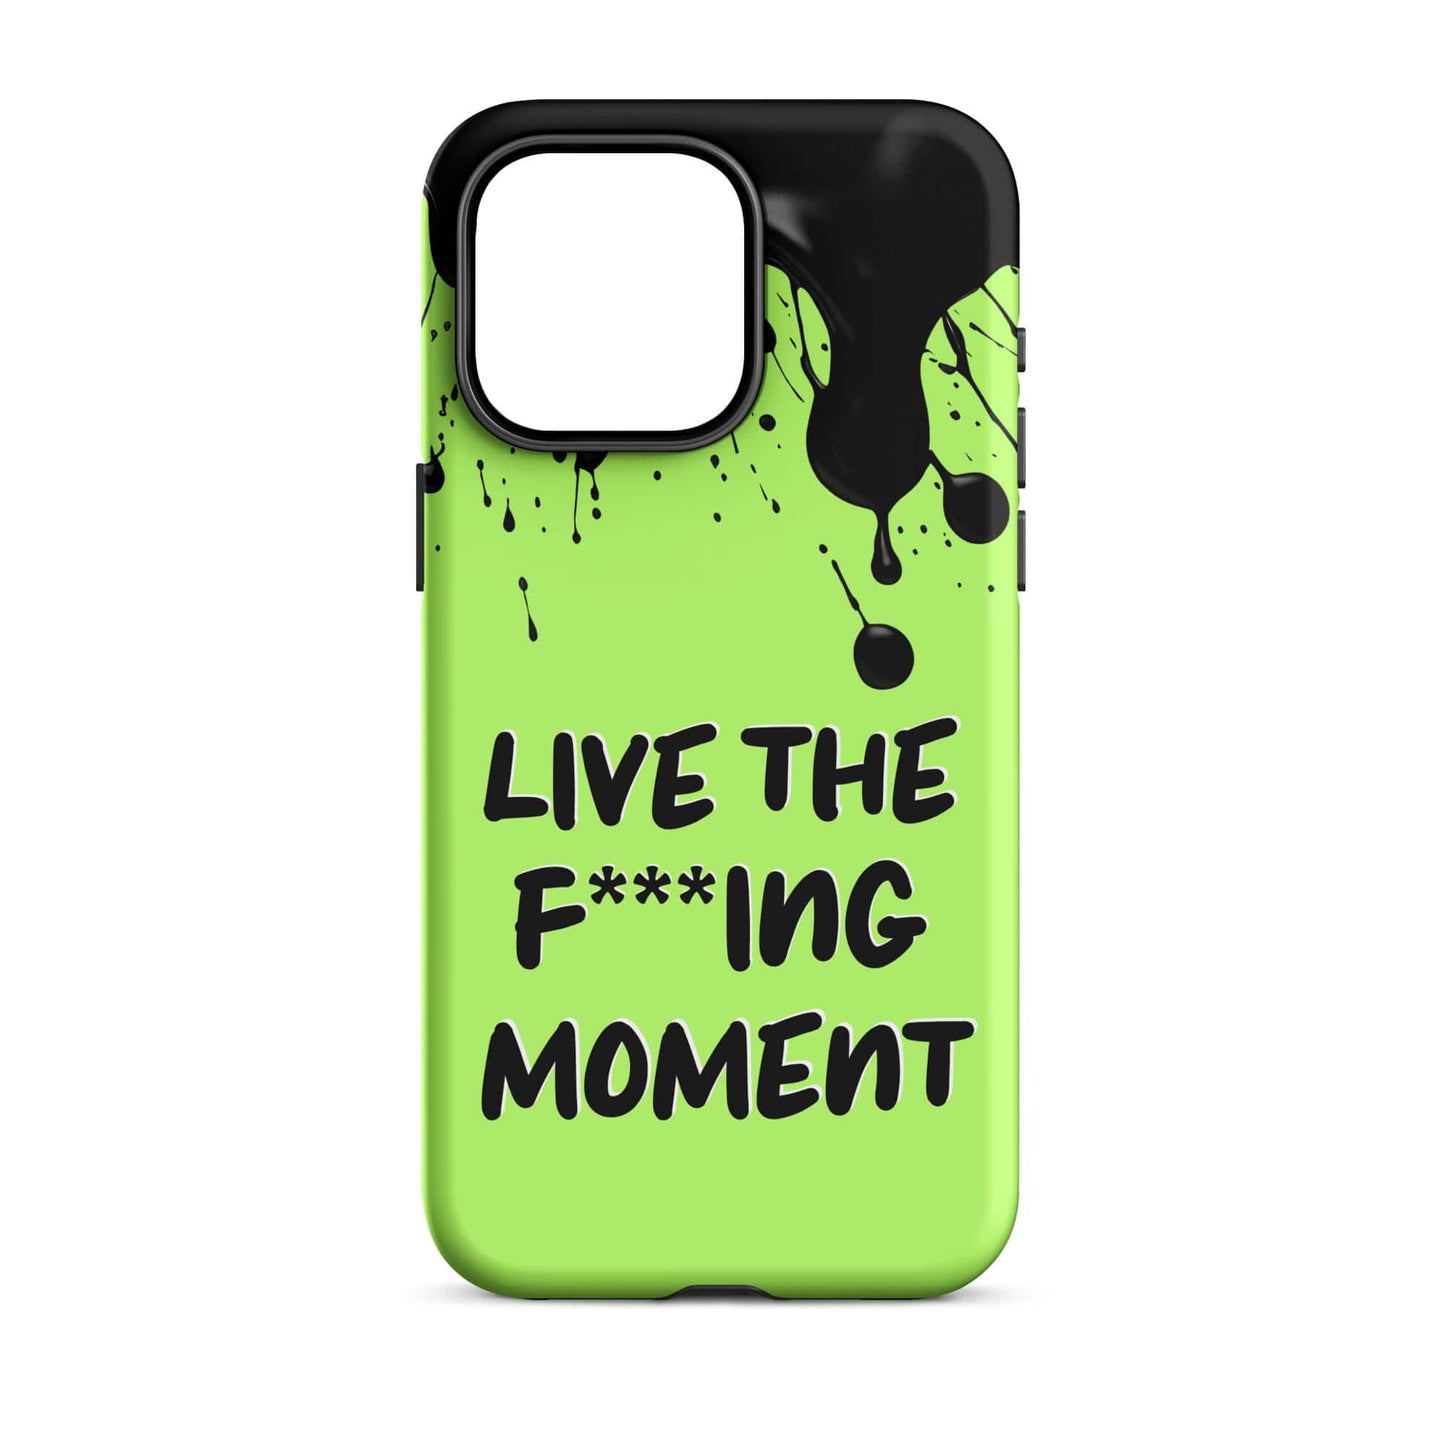 Live The F***ing Moment - (Lime Green) Quoted iPhone Case